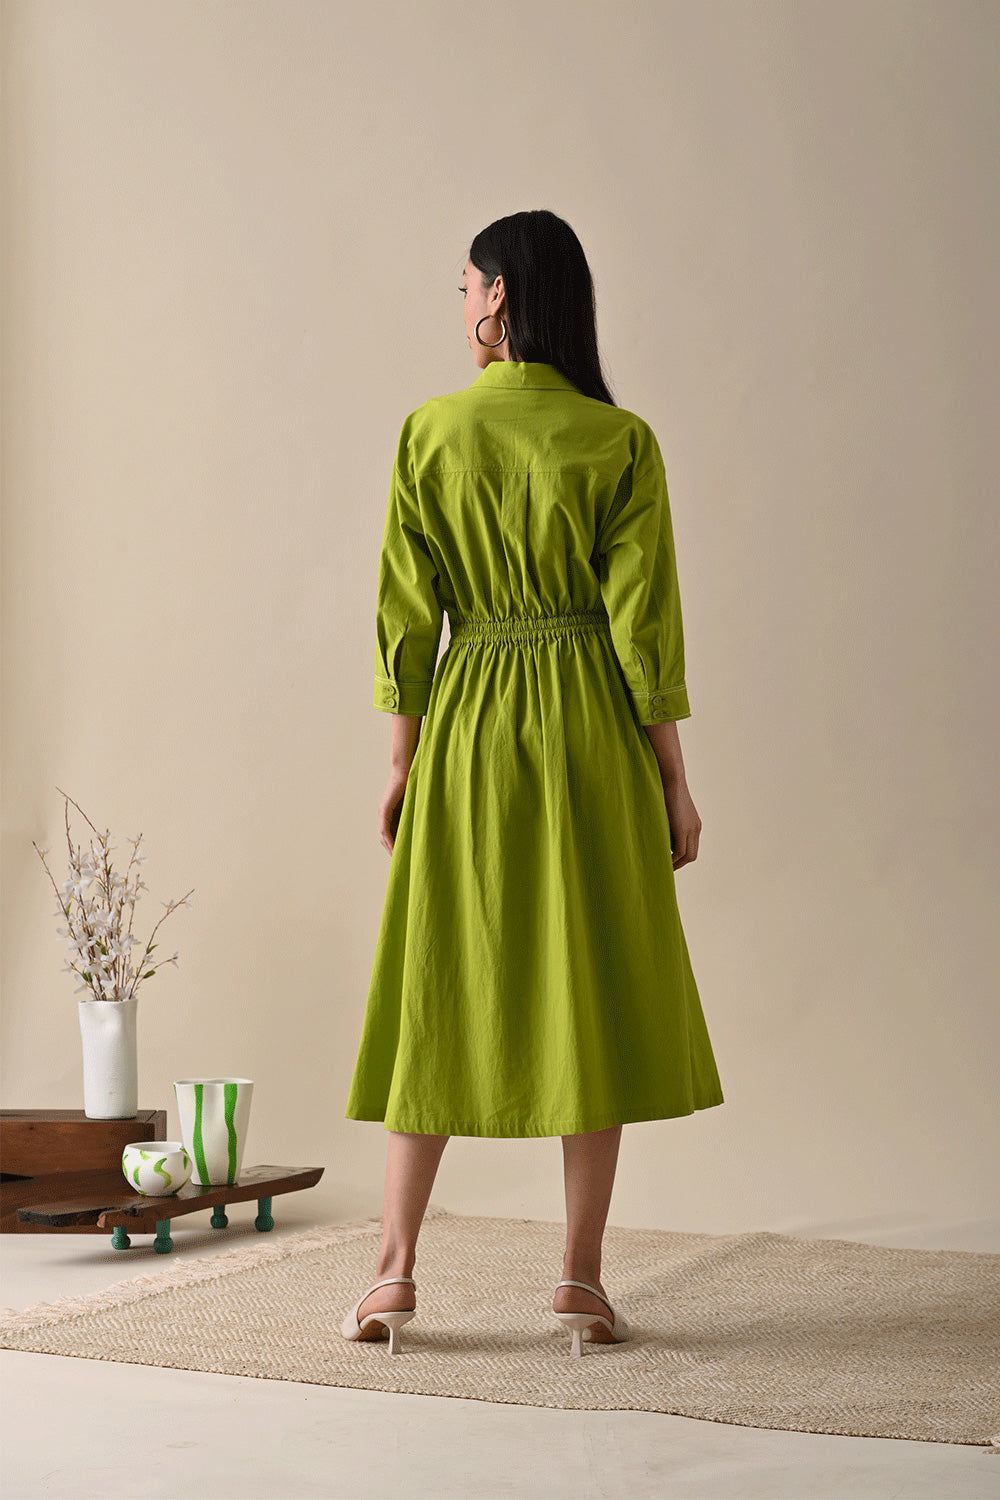 Olive Midi Dress at Kamakhyaa by Kanelle. This item is Best Selling, Casual Wear, Dresses, For Birthday, July Sale, Midi Dresses, Natural with azo dyes, Olive Green, Organic Cotton, Prints, Relaxed Fit, Womenswear